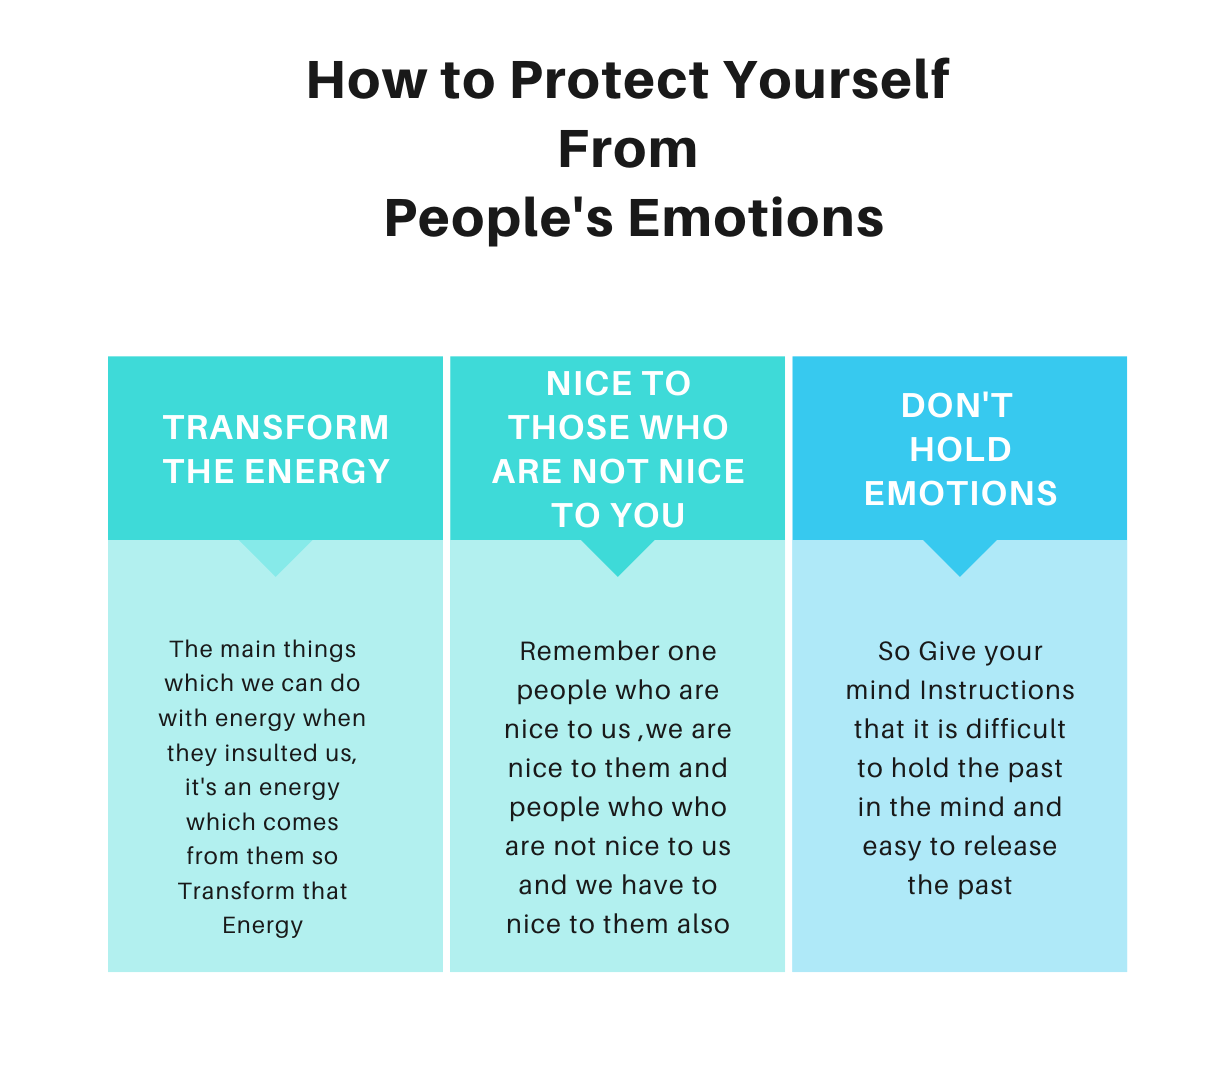 How to Protect Yourself from People's Emotions